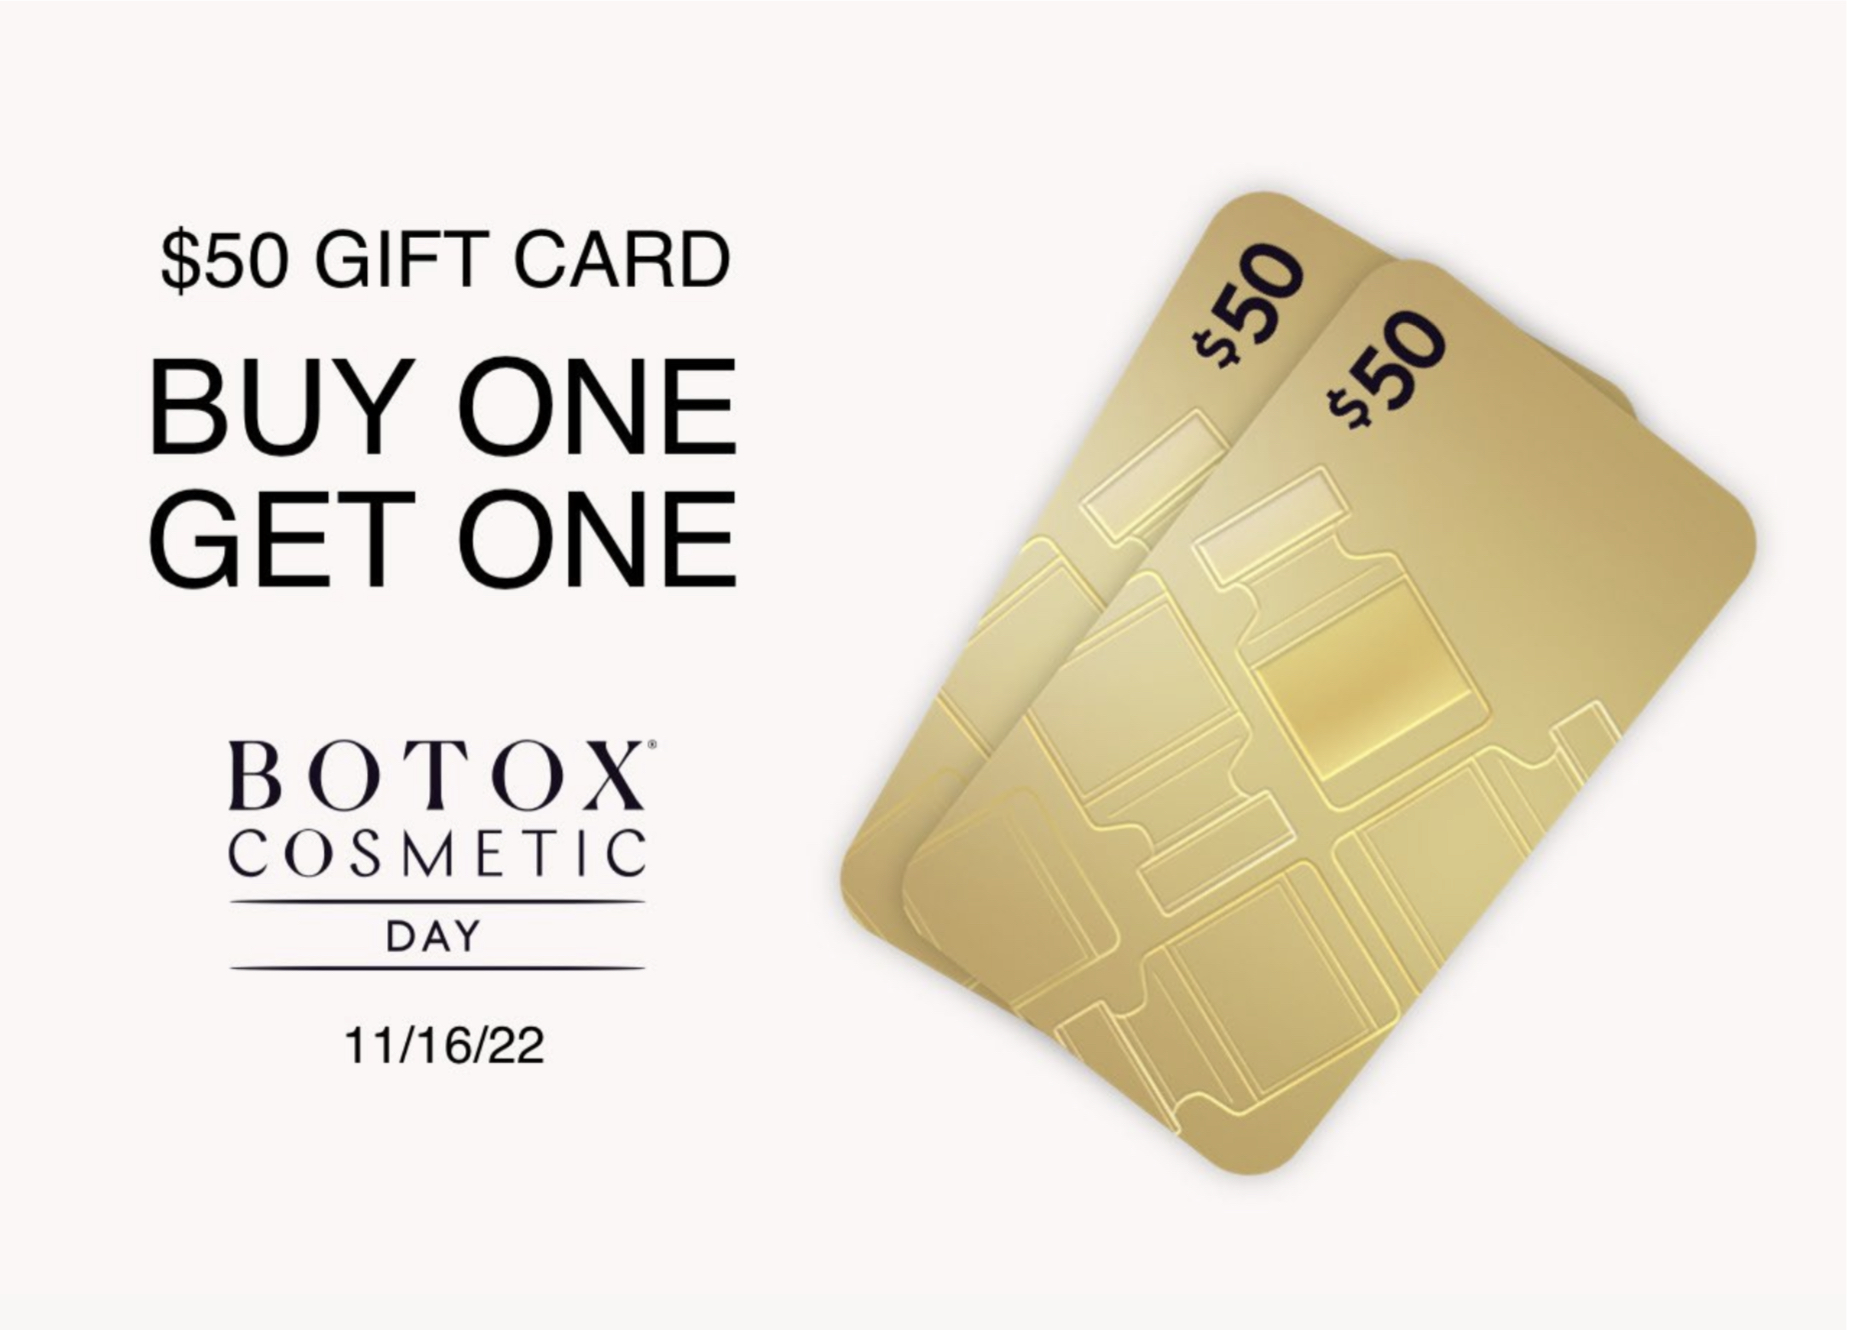 Botox Day 2022 Buy One Get One free gift card valid on November 16 2022 Image with two $50 gift cards